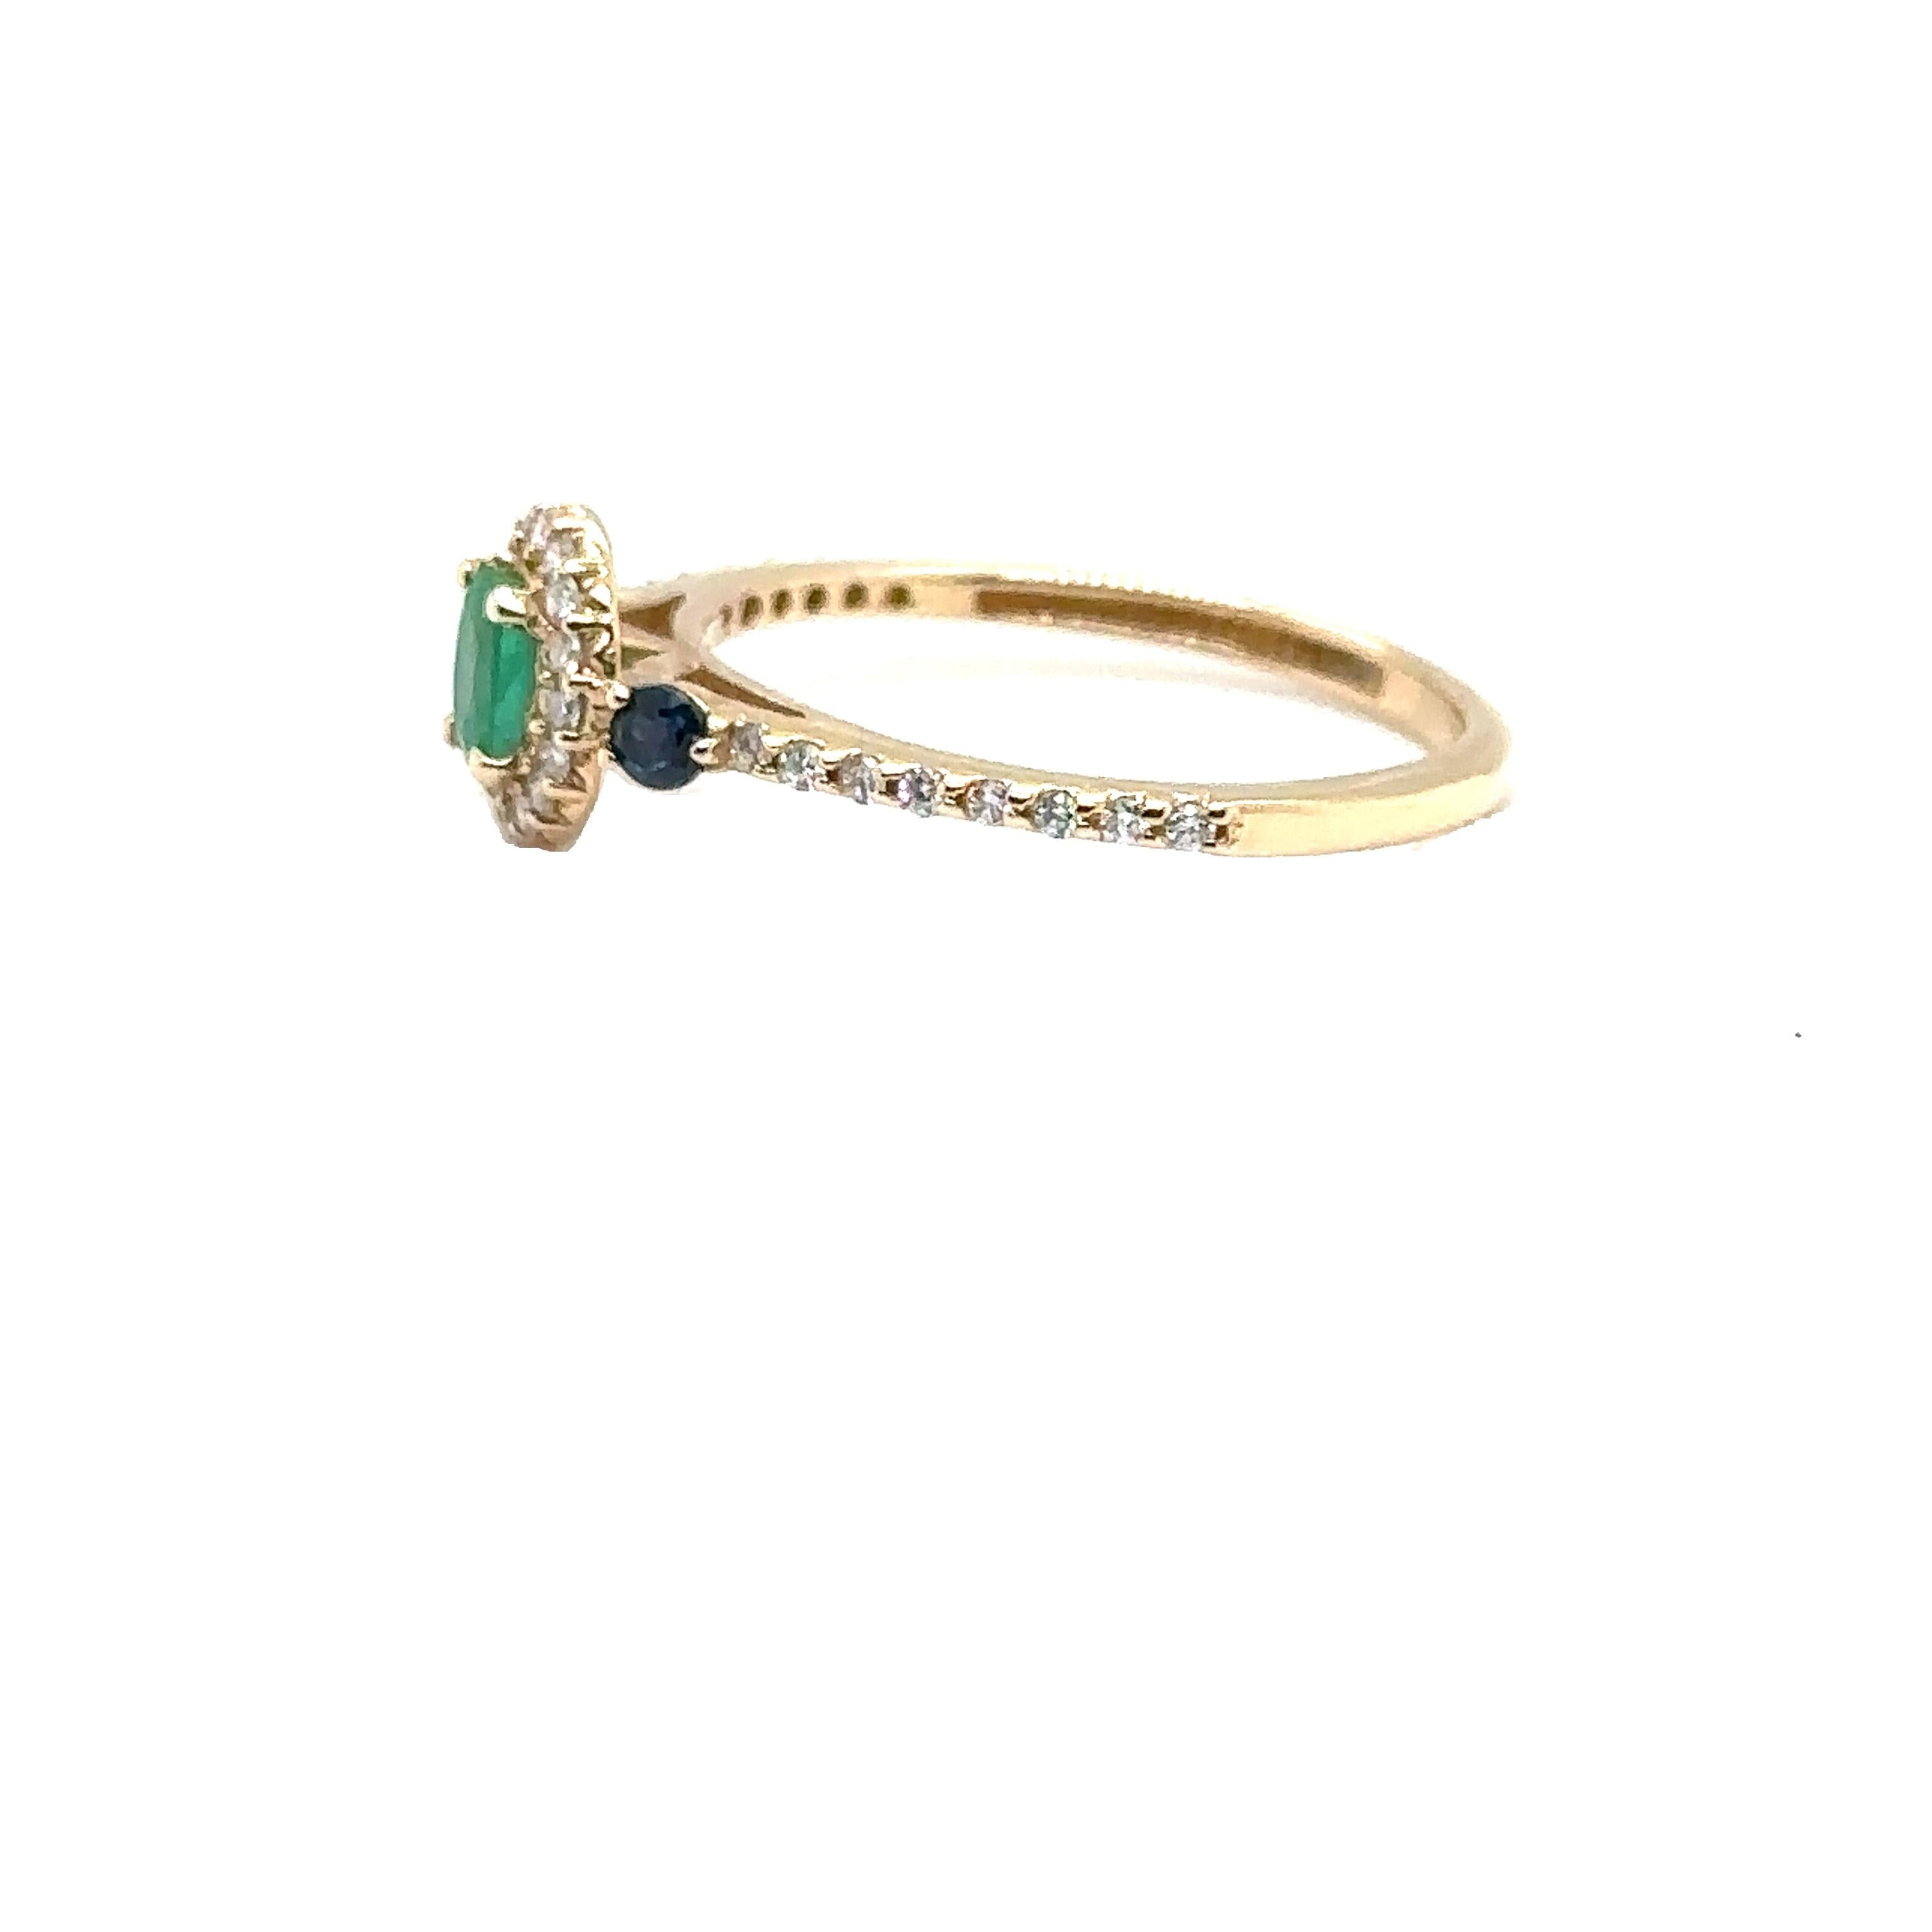 JAS-20-2134 - 14K YELLOW GOLD EMERALD RING with SAPPHIRES & DIAMONDS  For Sale 3